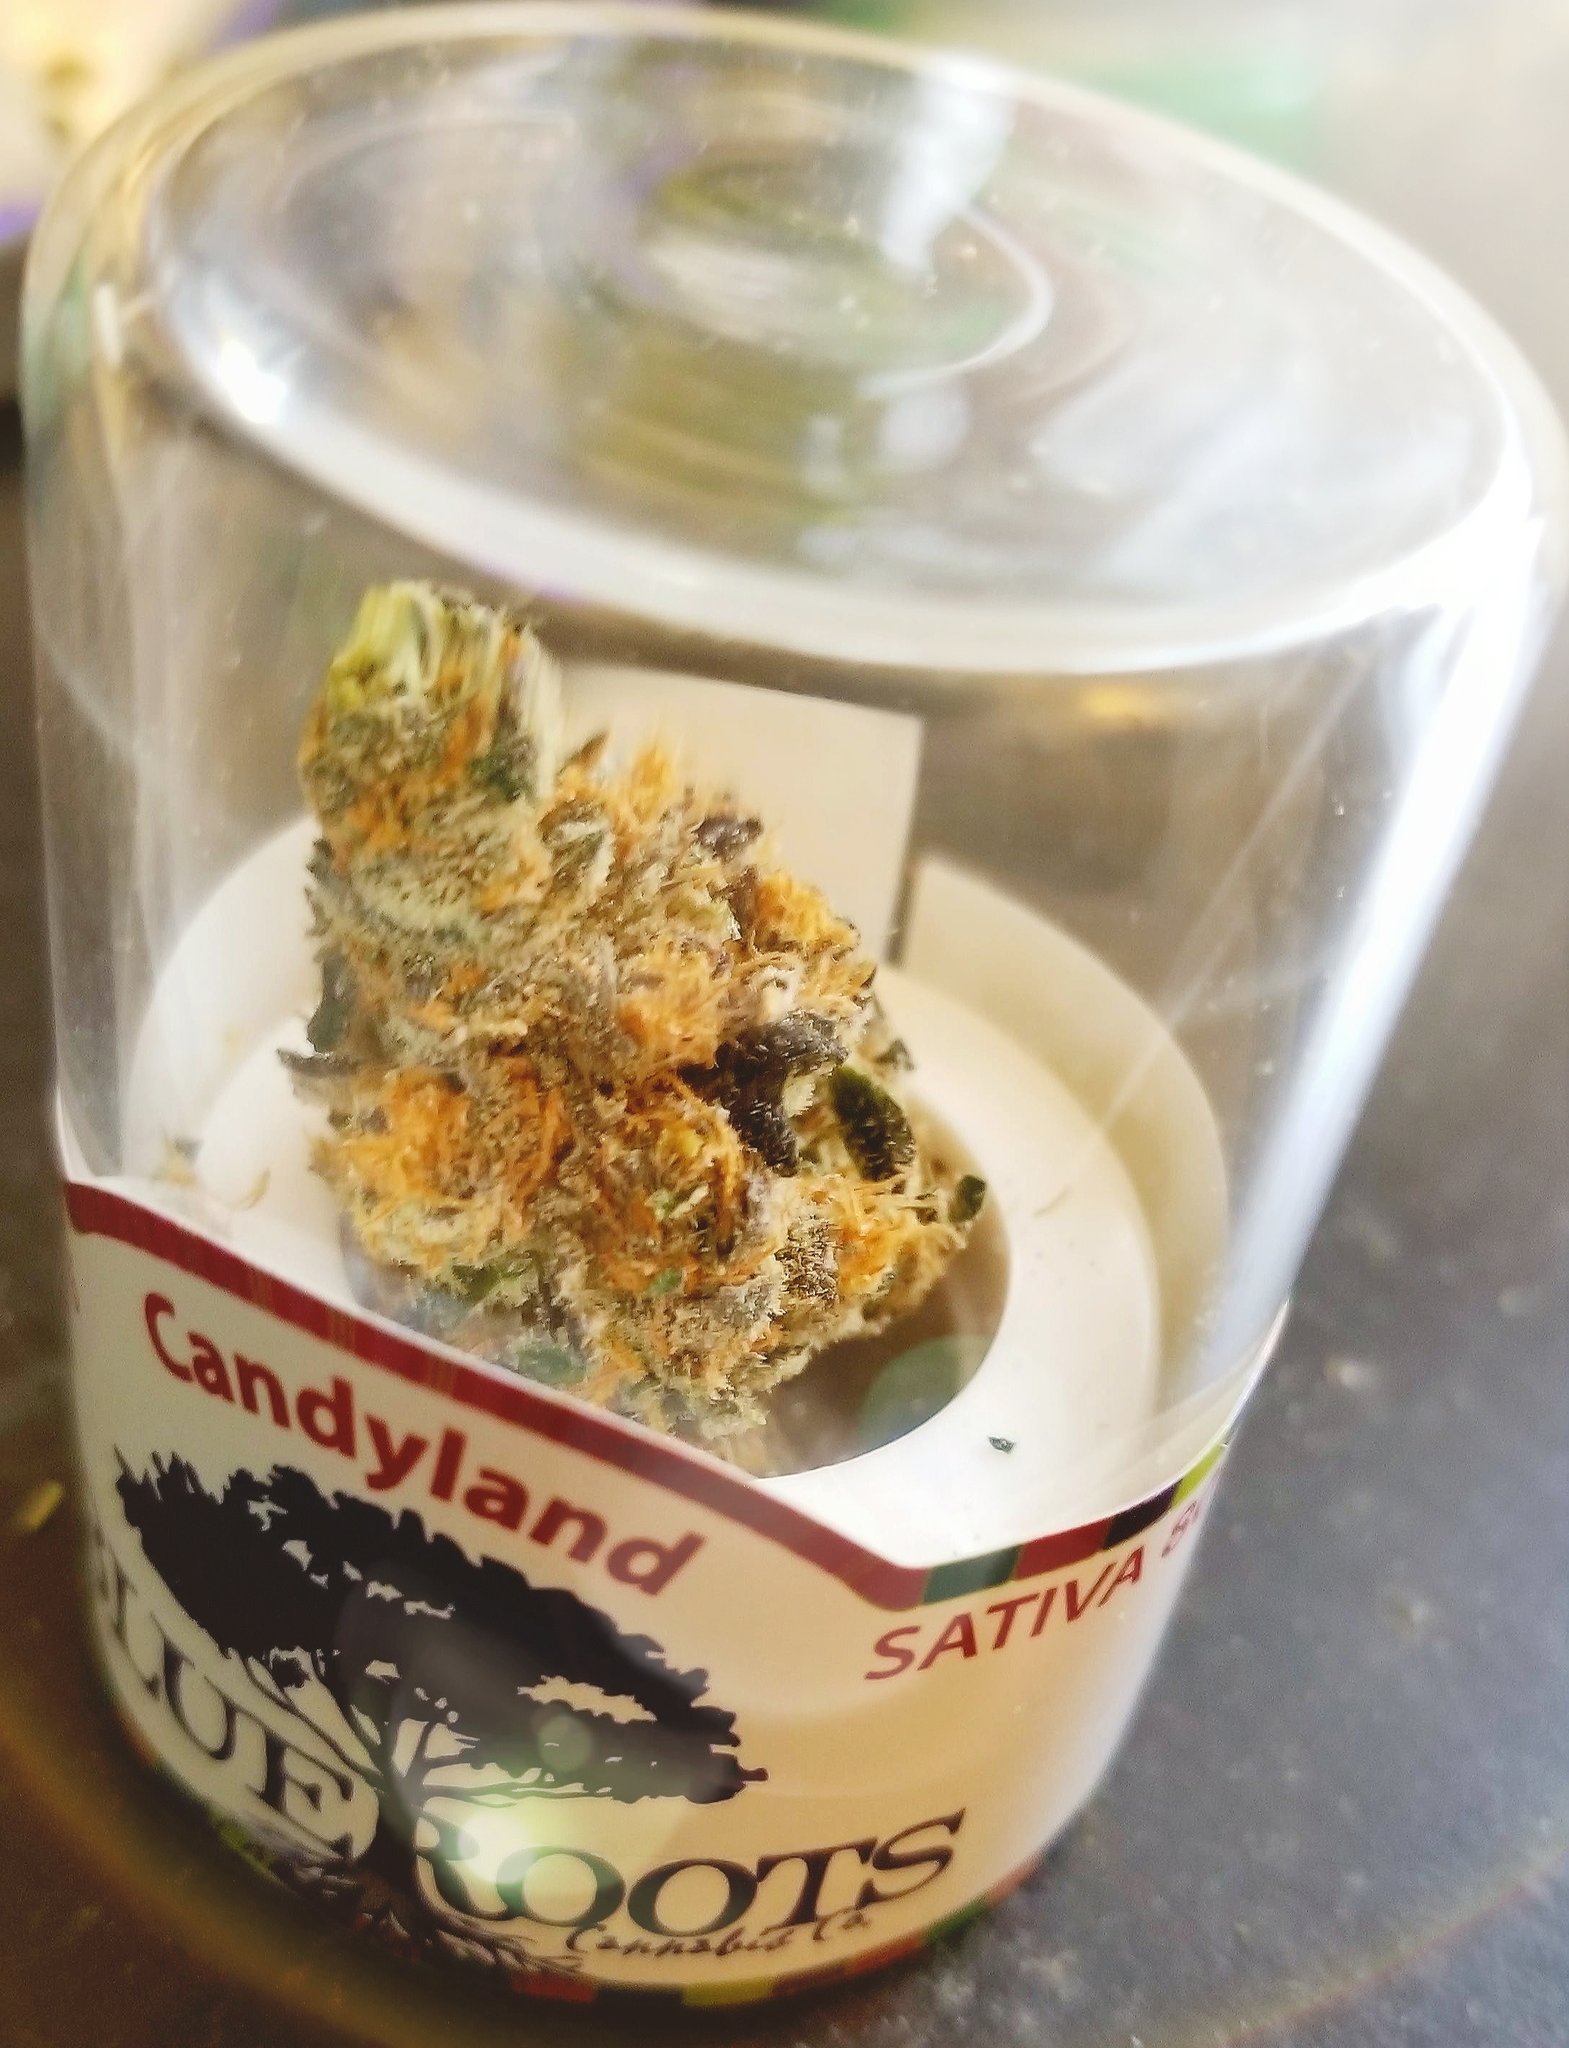 candyland blue roots cannabis, candyland strain, blue roots cannabis